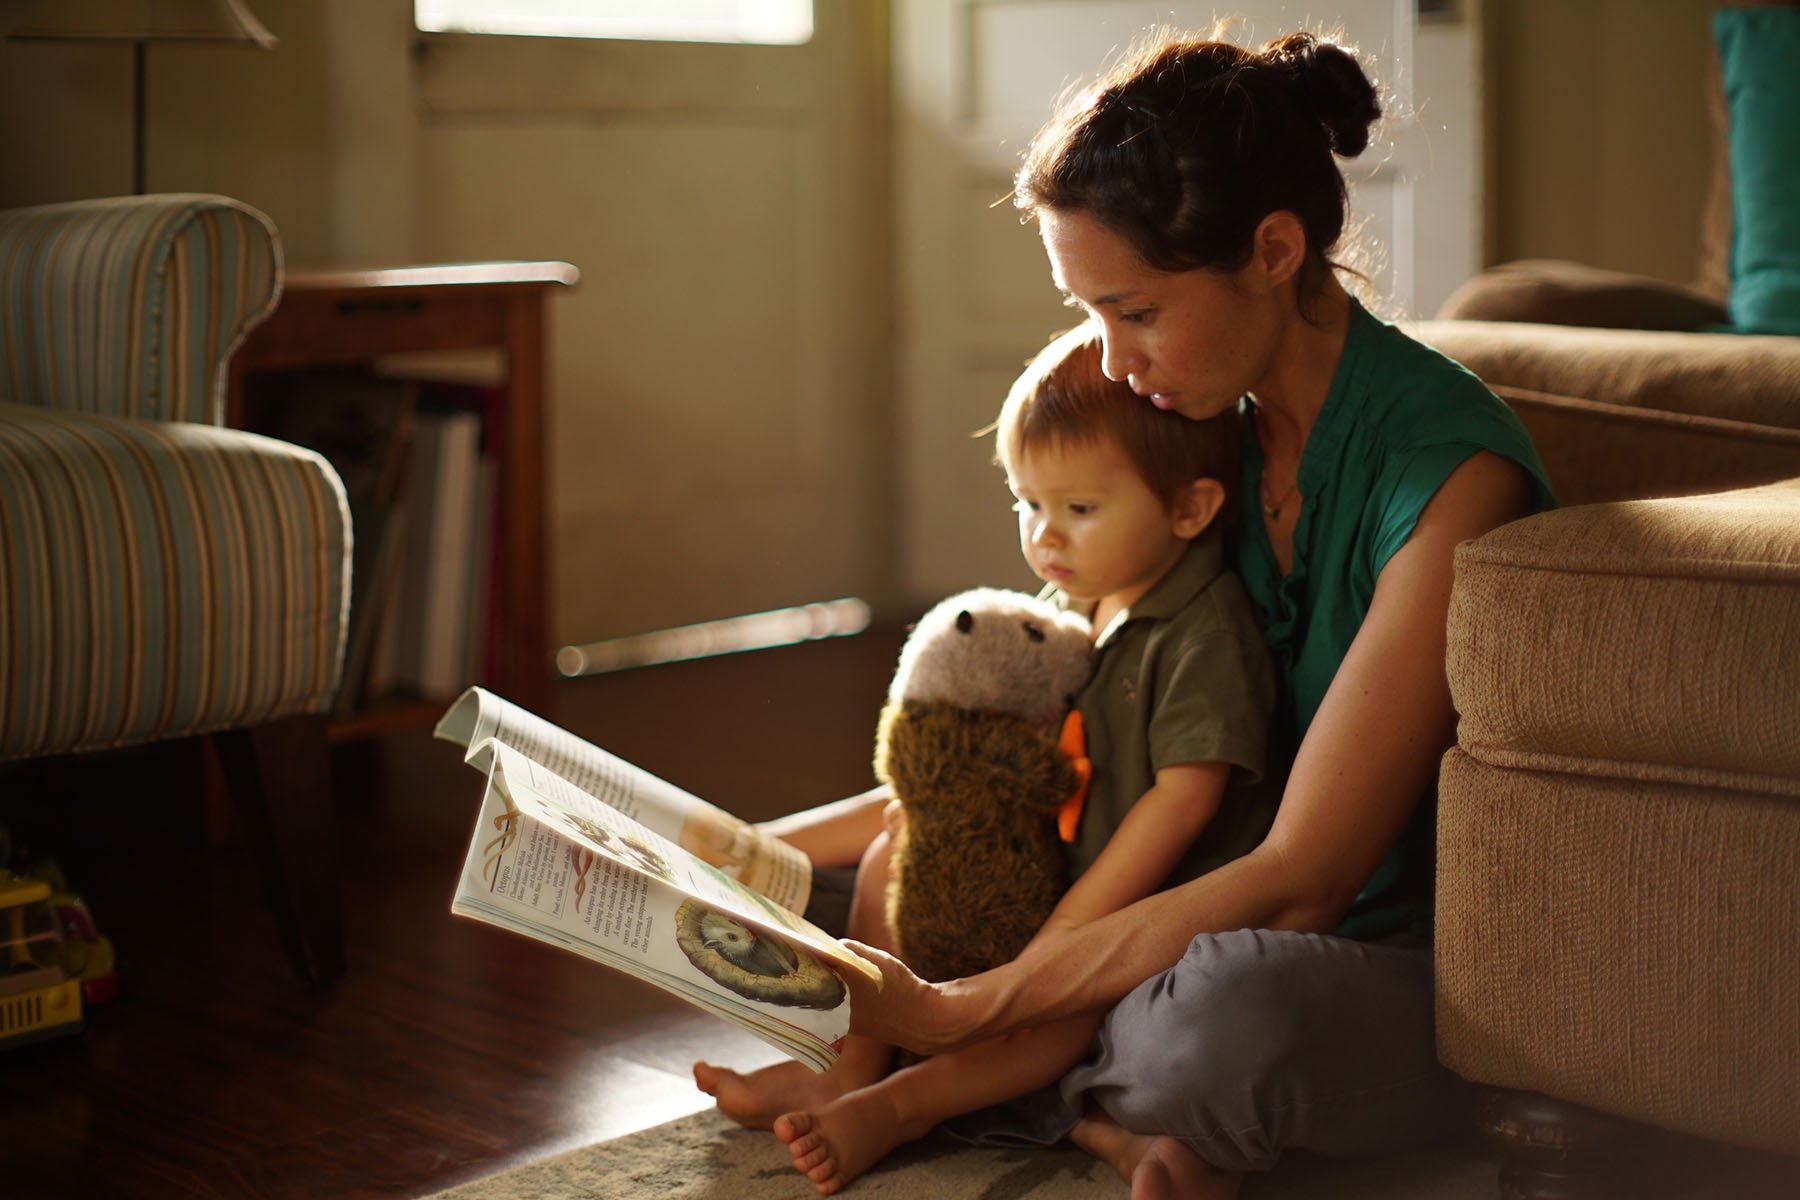 Cynthia King reads to her son Dexter Muir at their home.